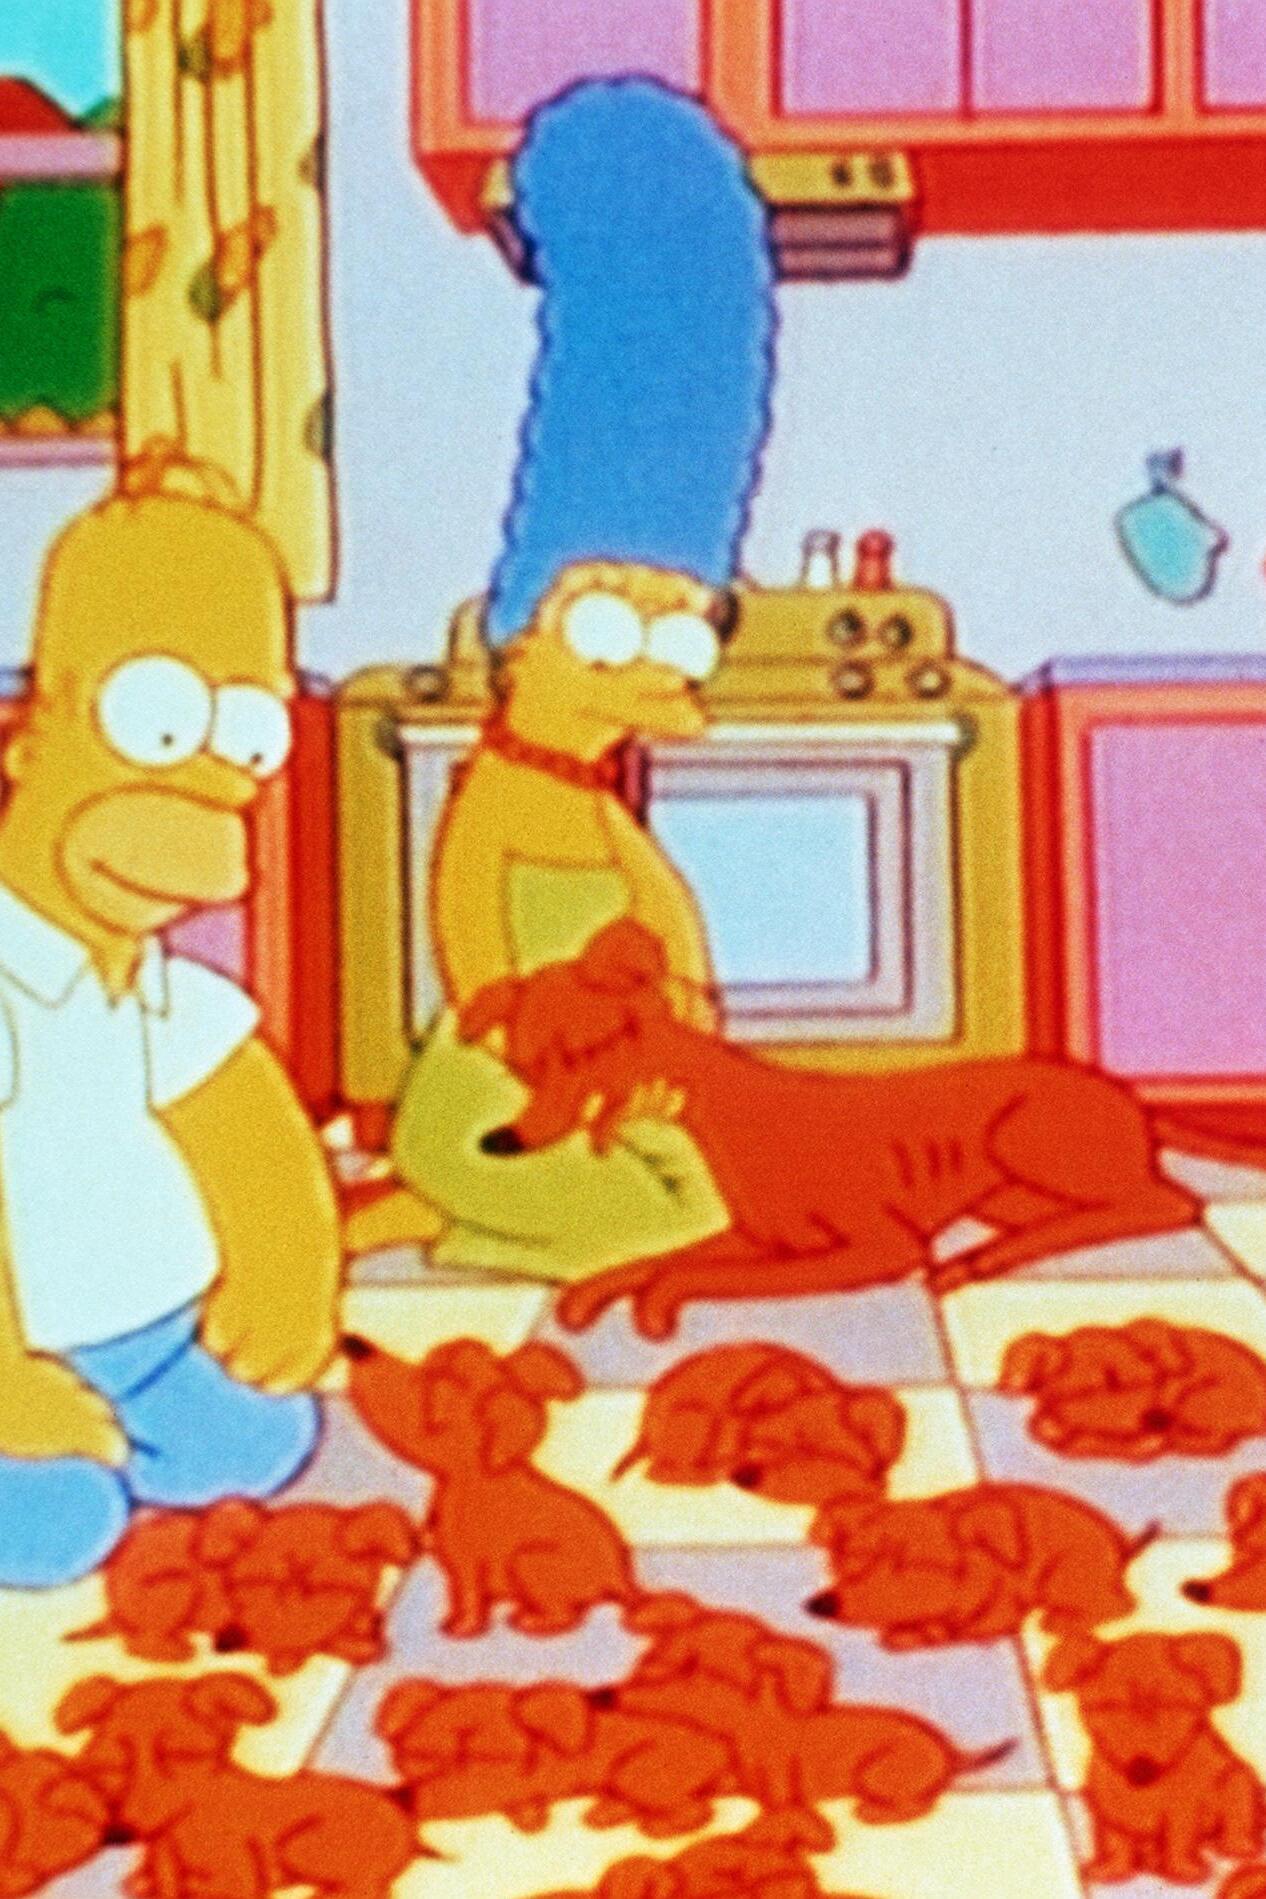 The Simpsons - Two Dozen and One Greyhounds